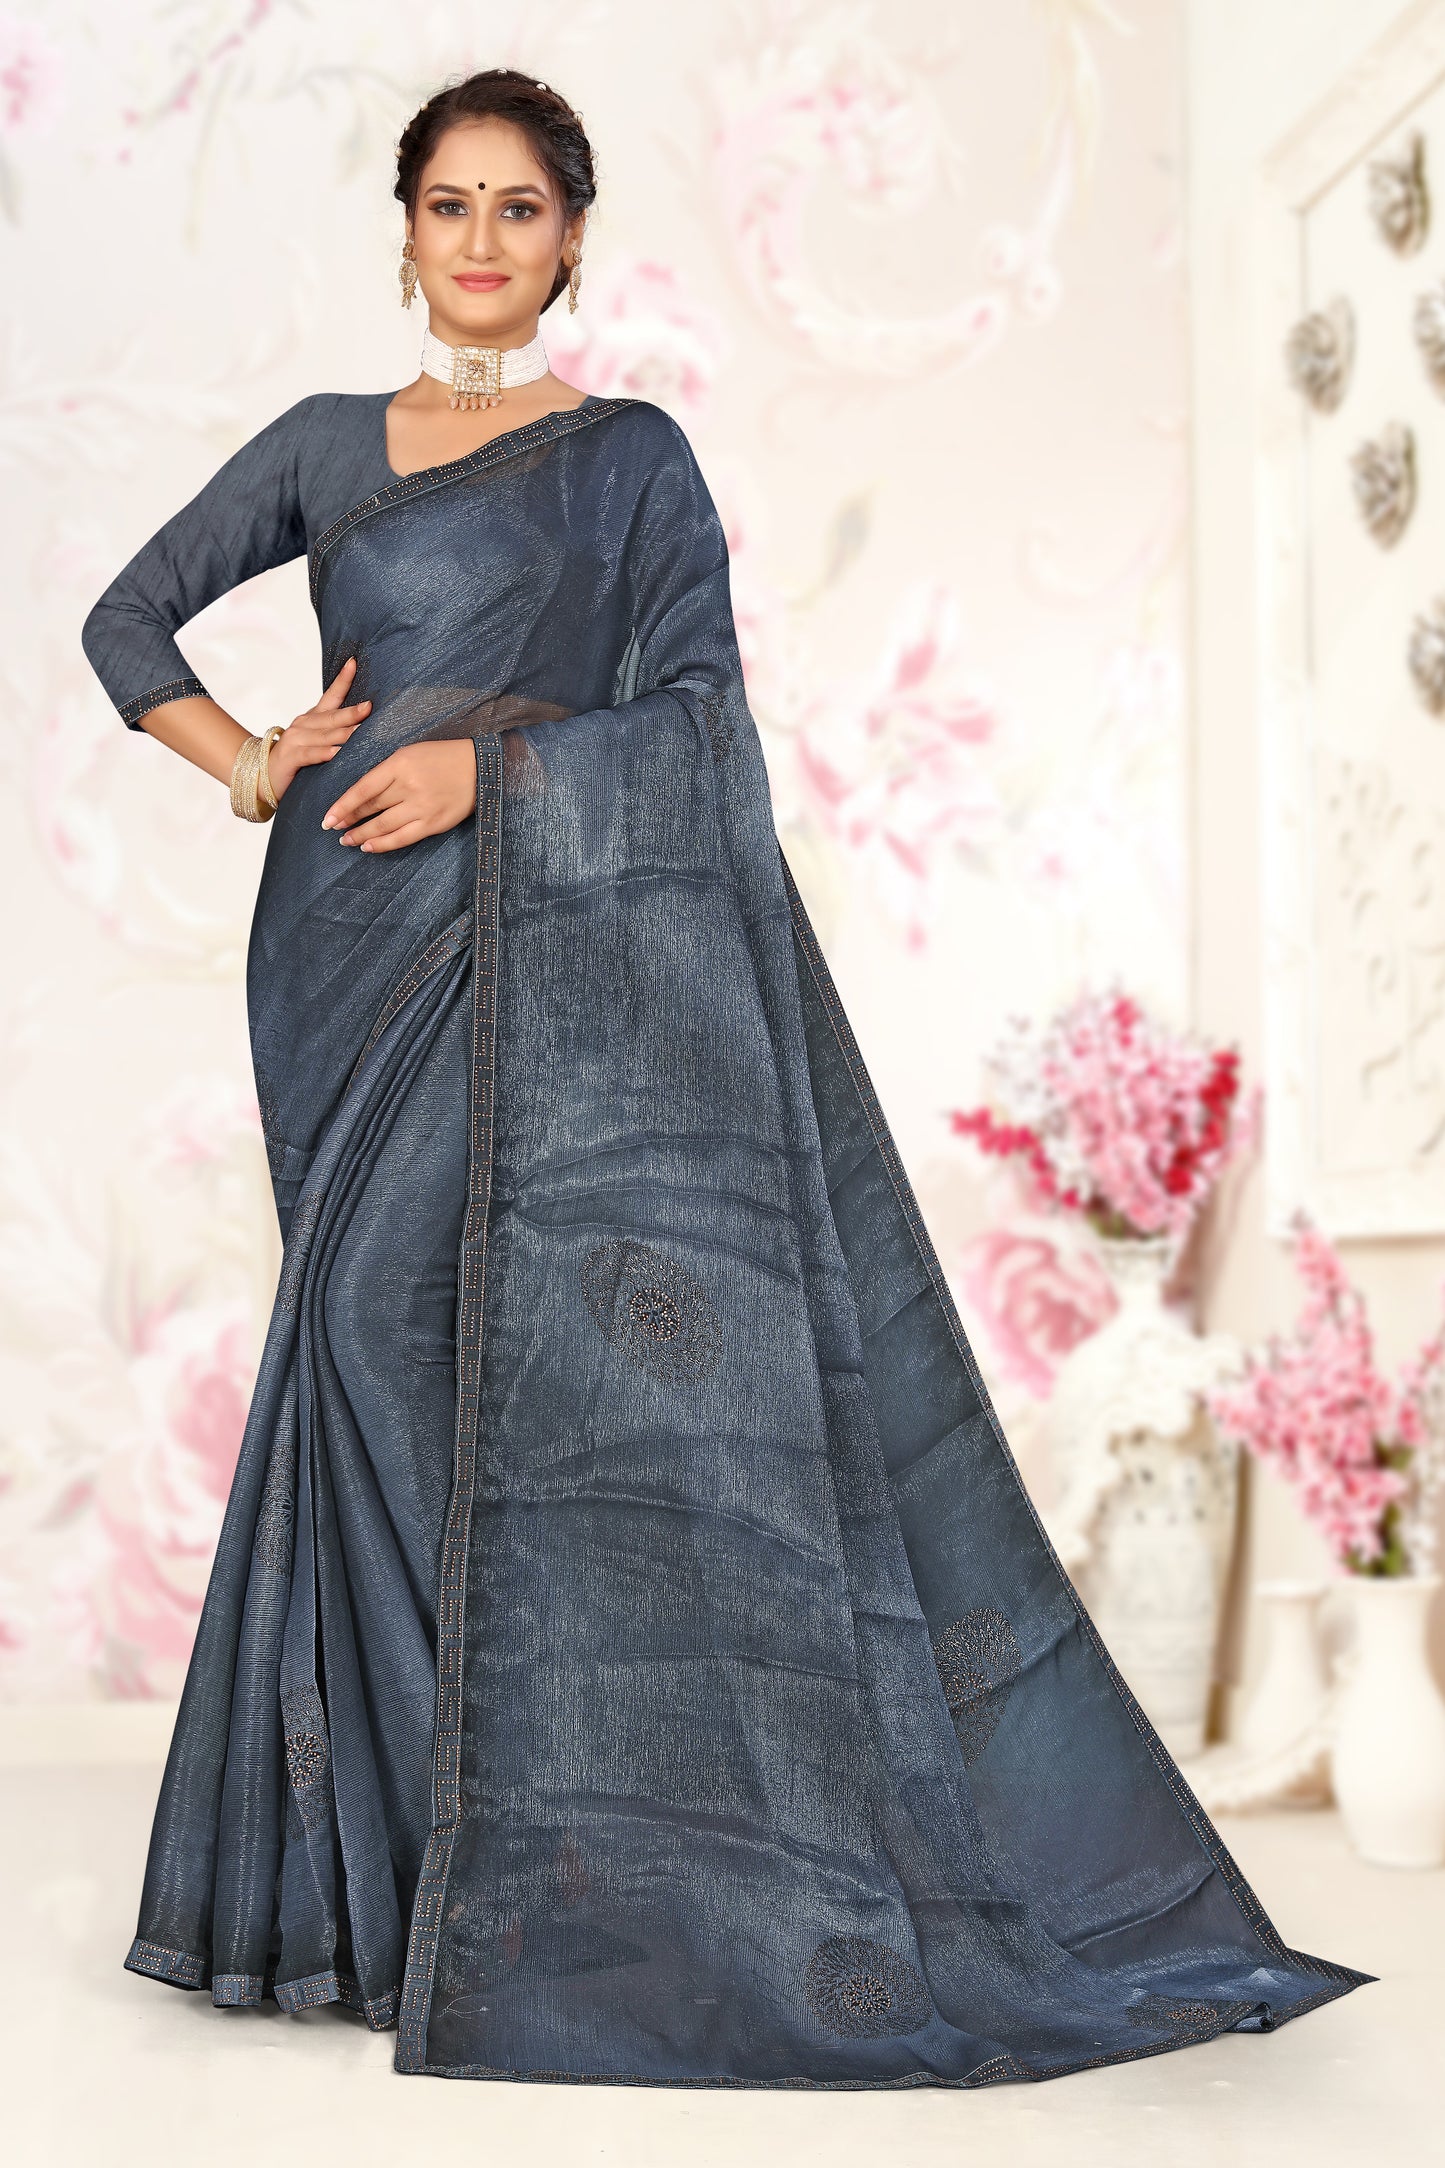 BLUE CHIFFON SAREE IN 5G FOR DAILY OCCASSION.